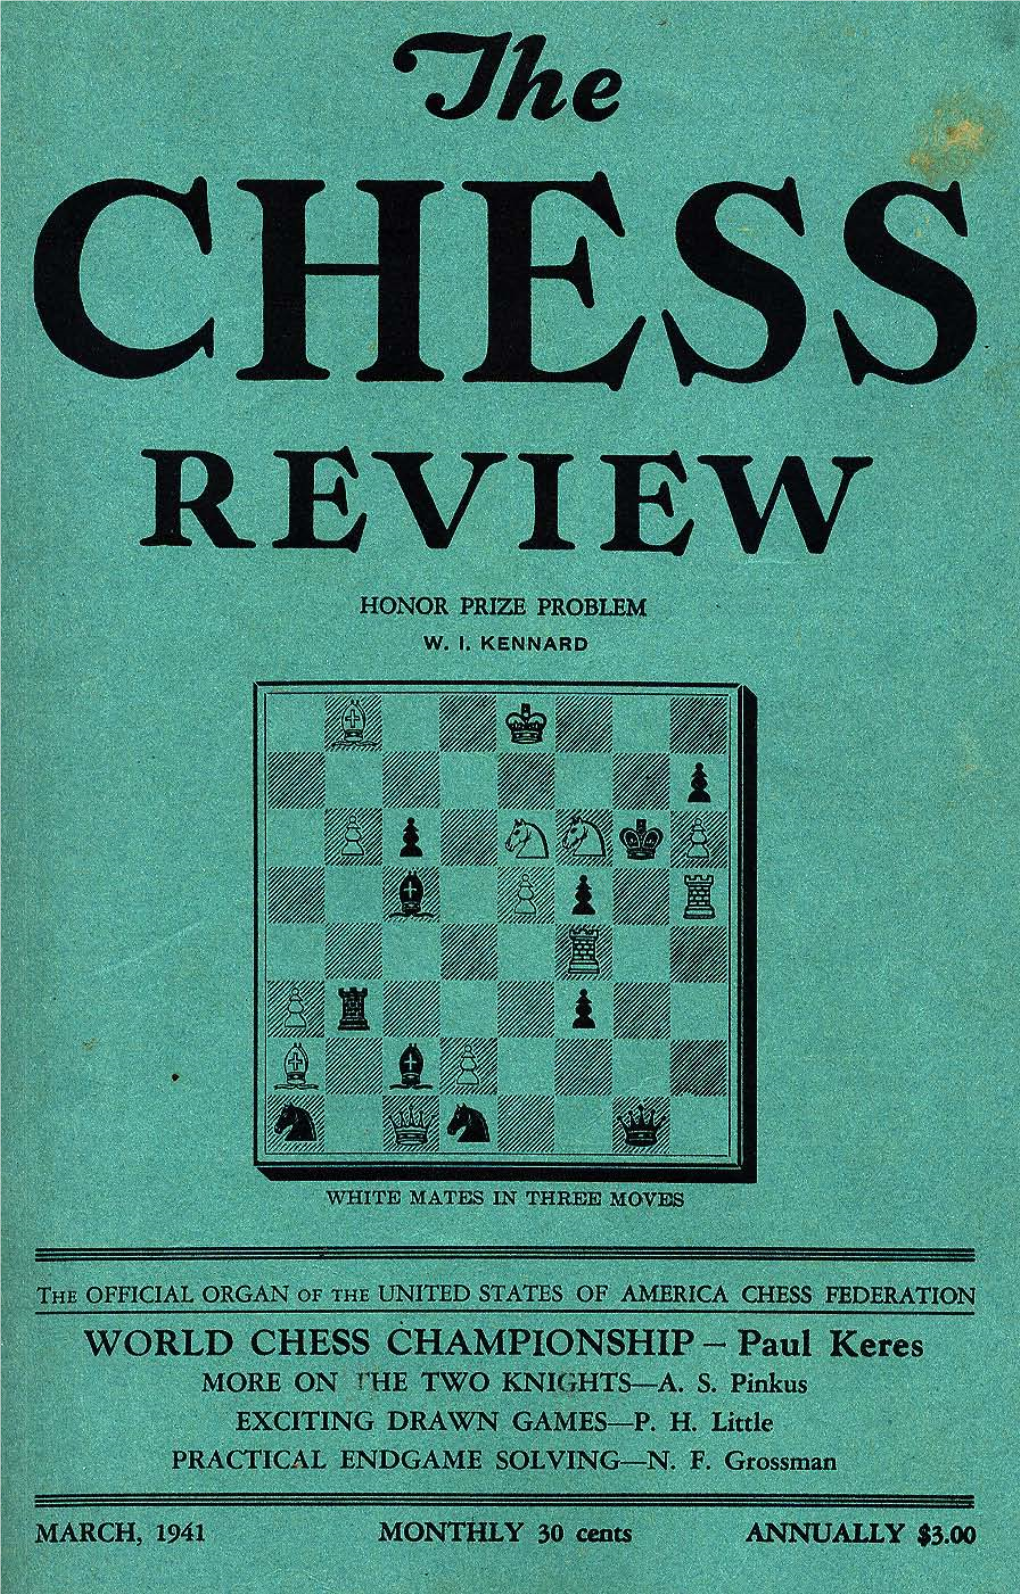 WORLD CHESS CHAMPIONSHIP - Paul Keres MORE on 1"HE TWO KNIGHTS-A